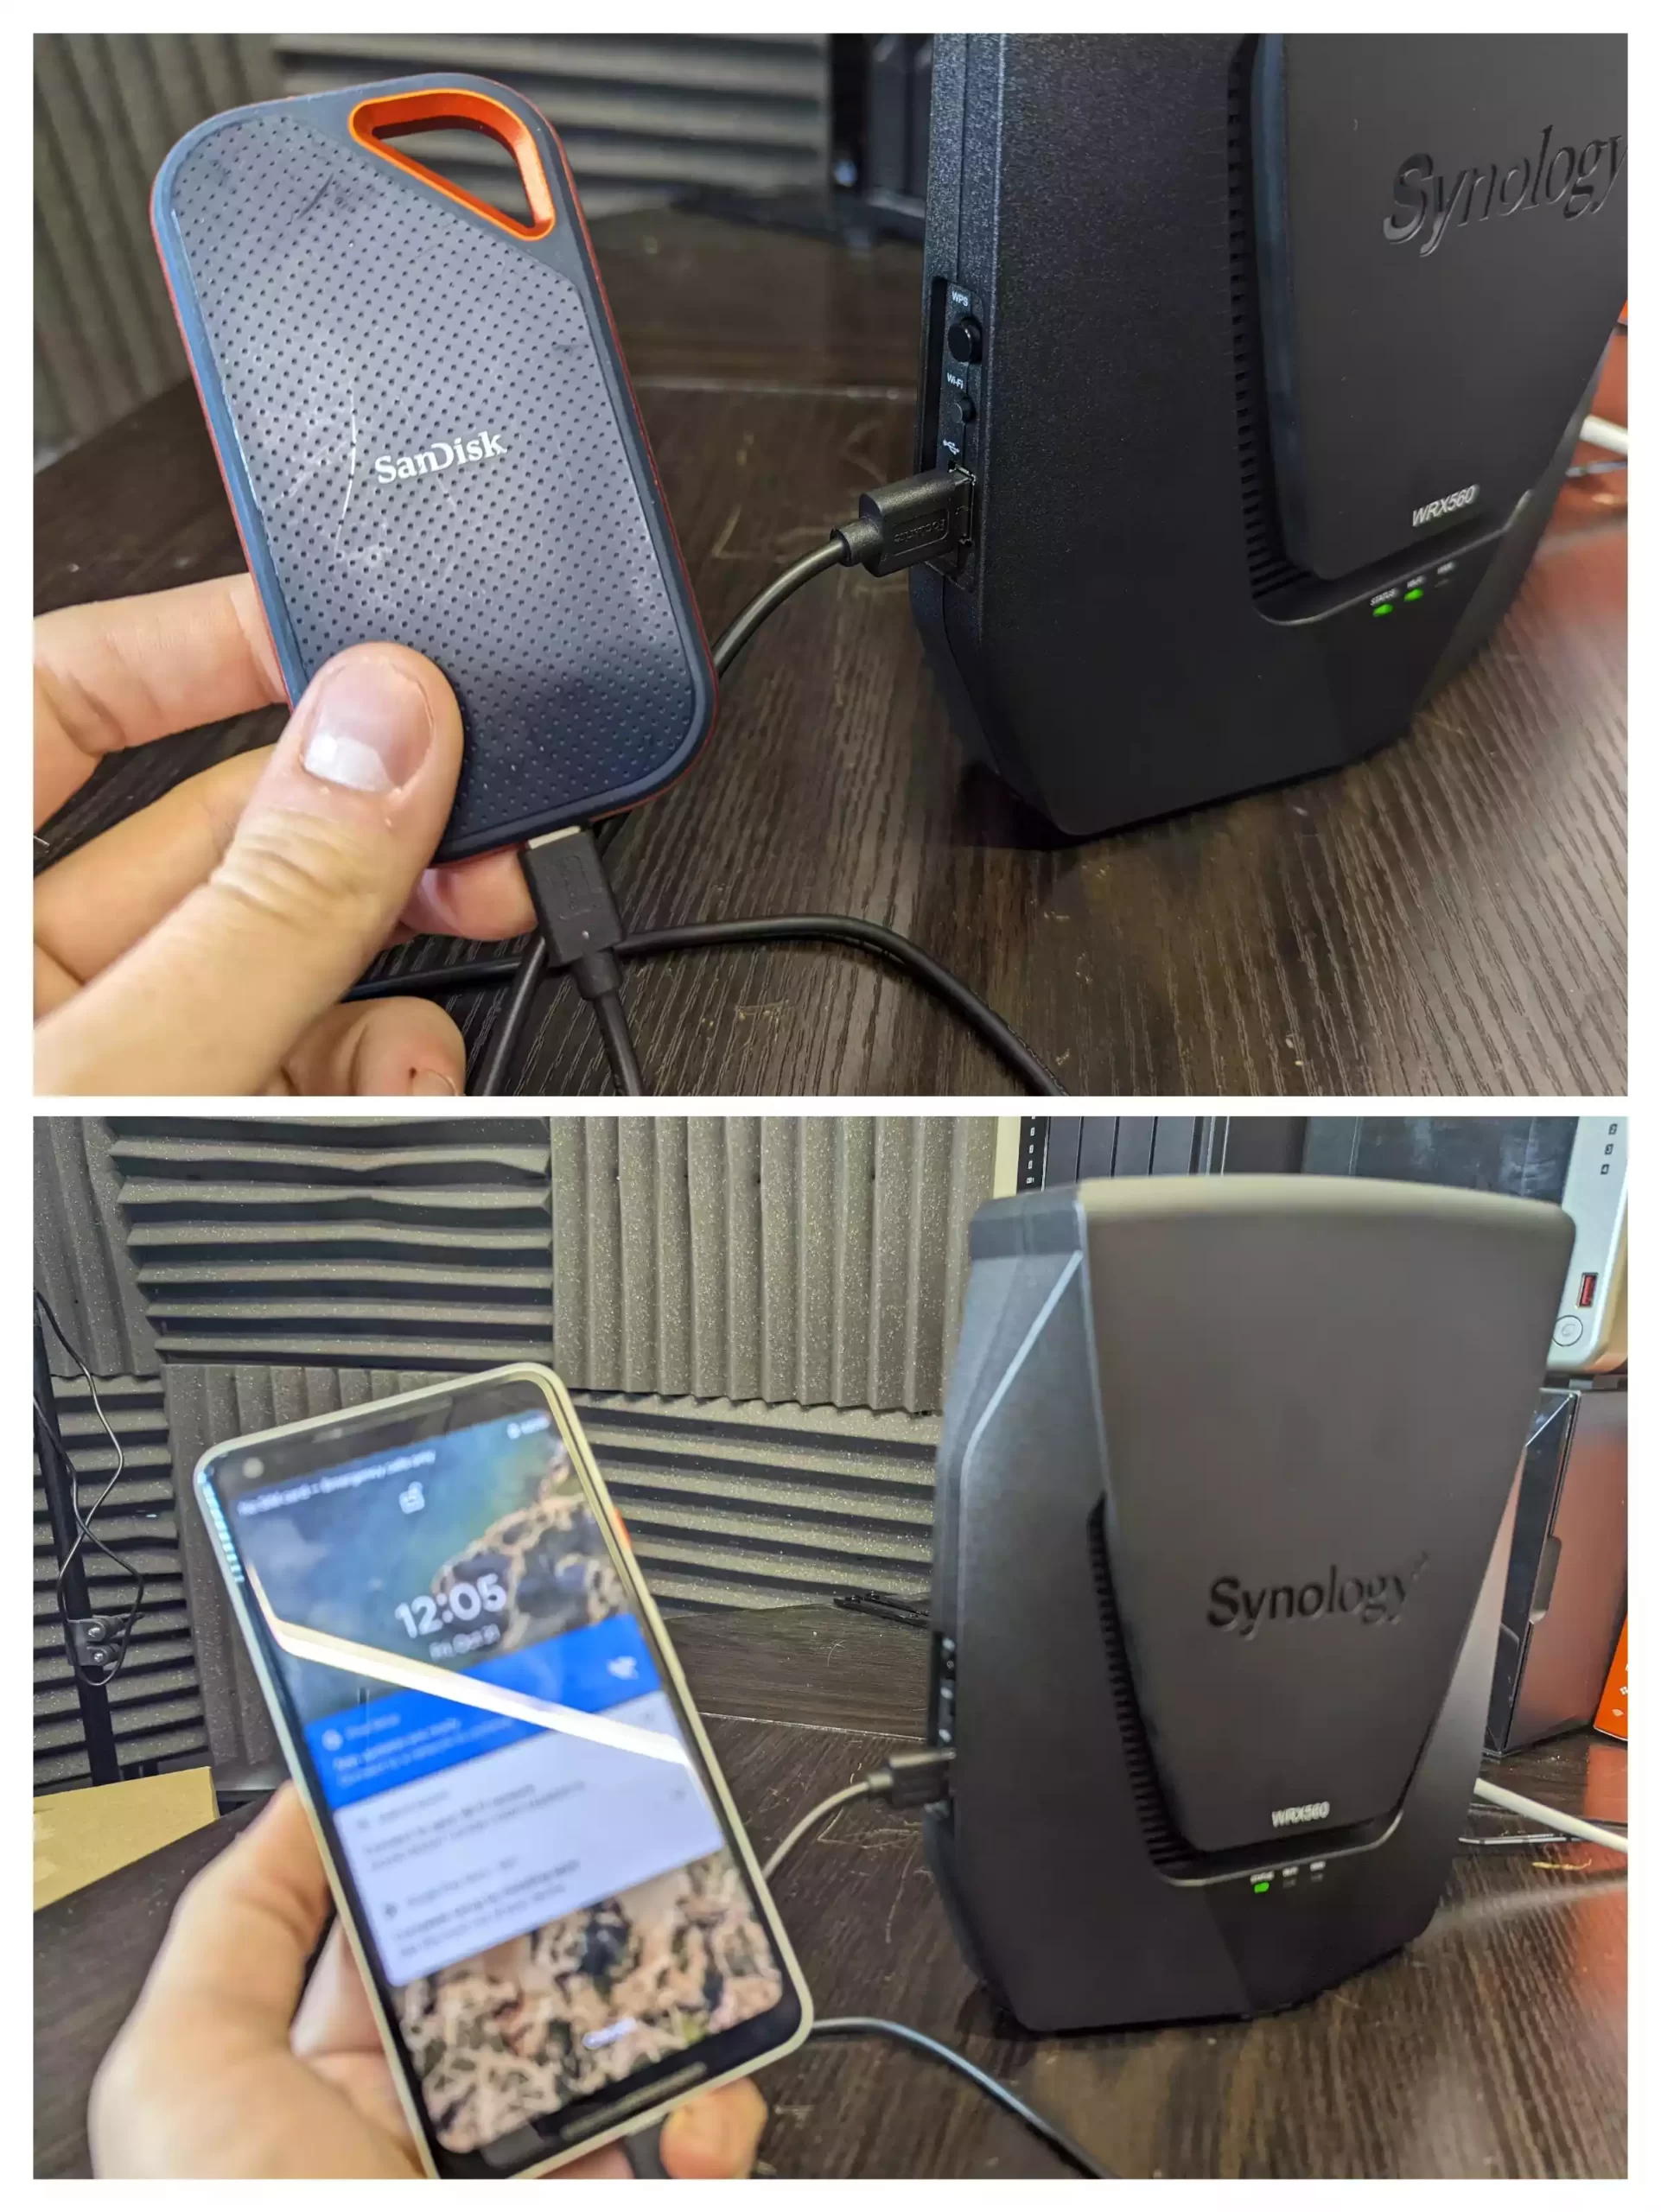 Synology WRX560 Router Review pic